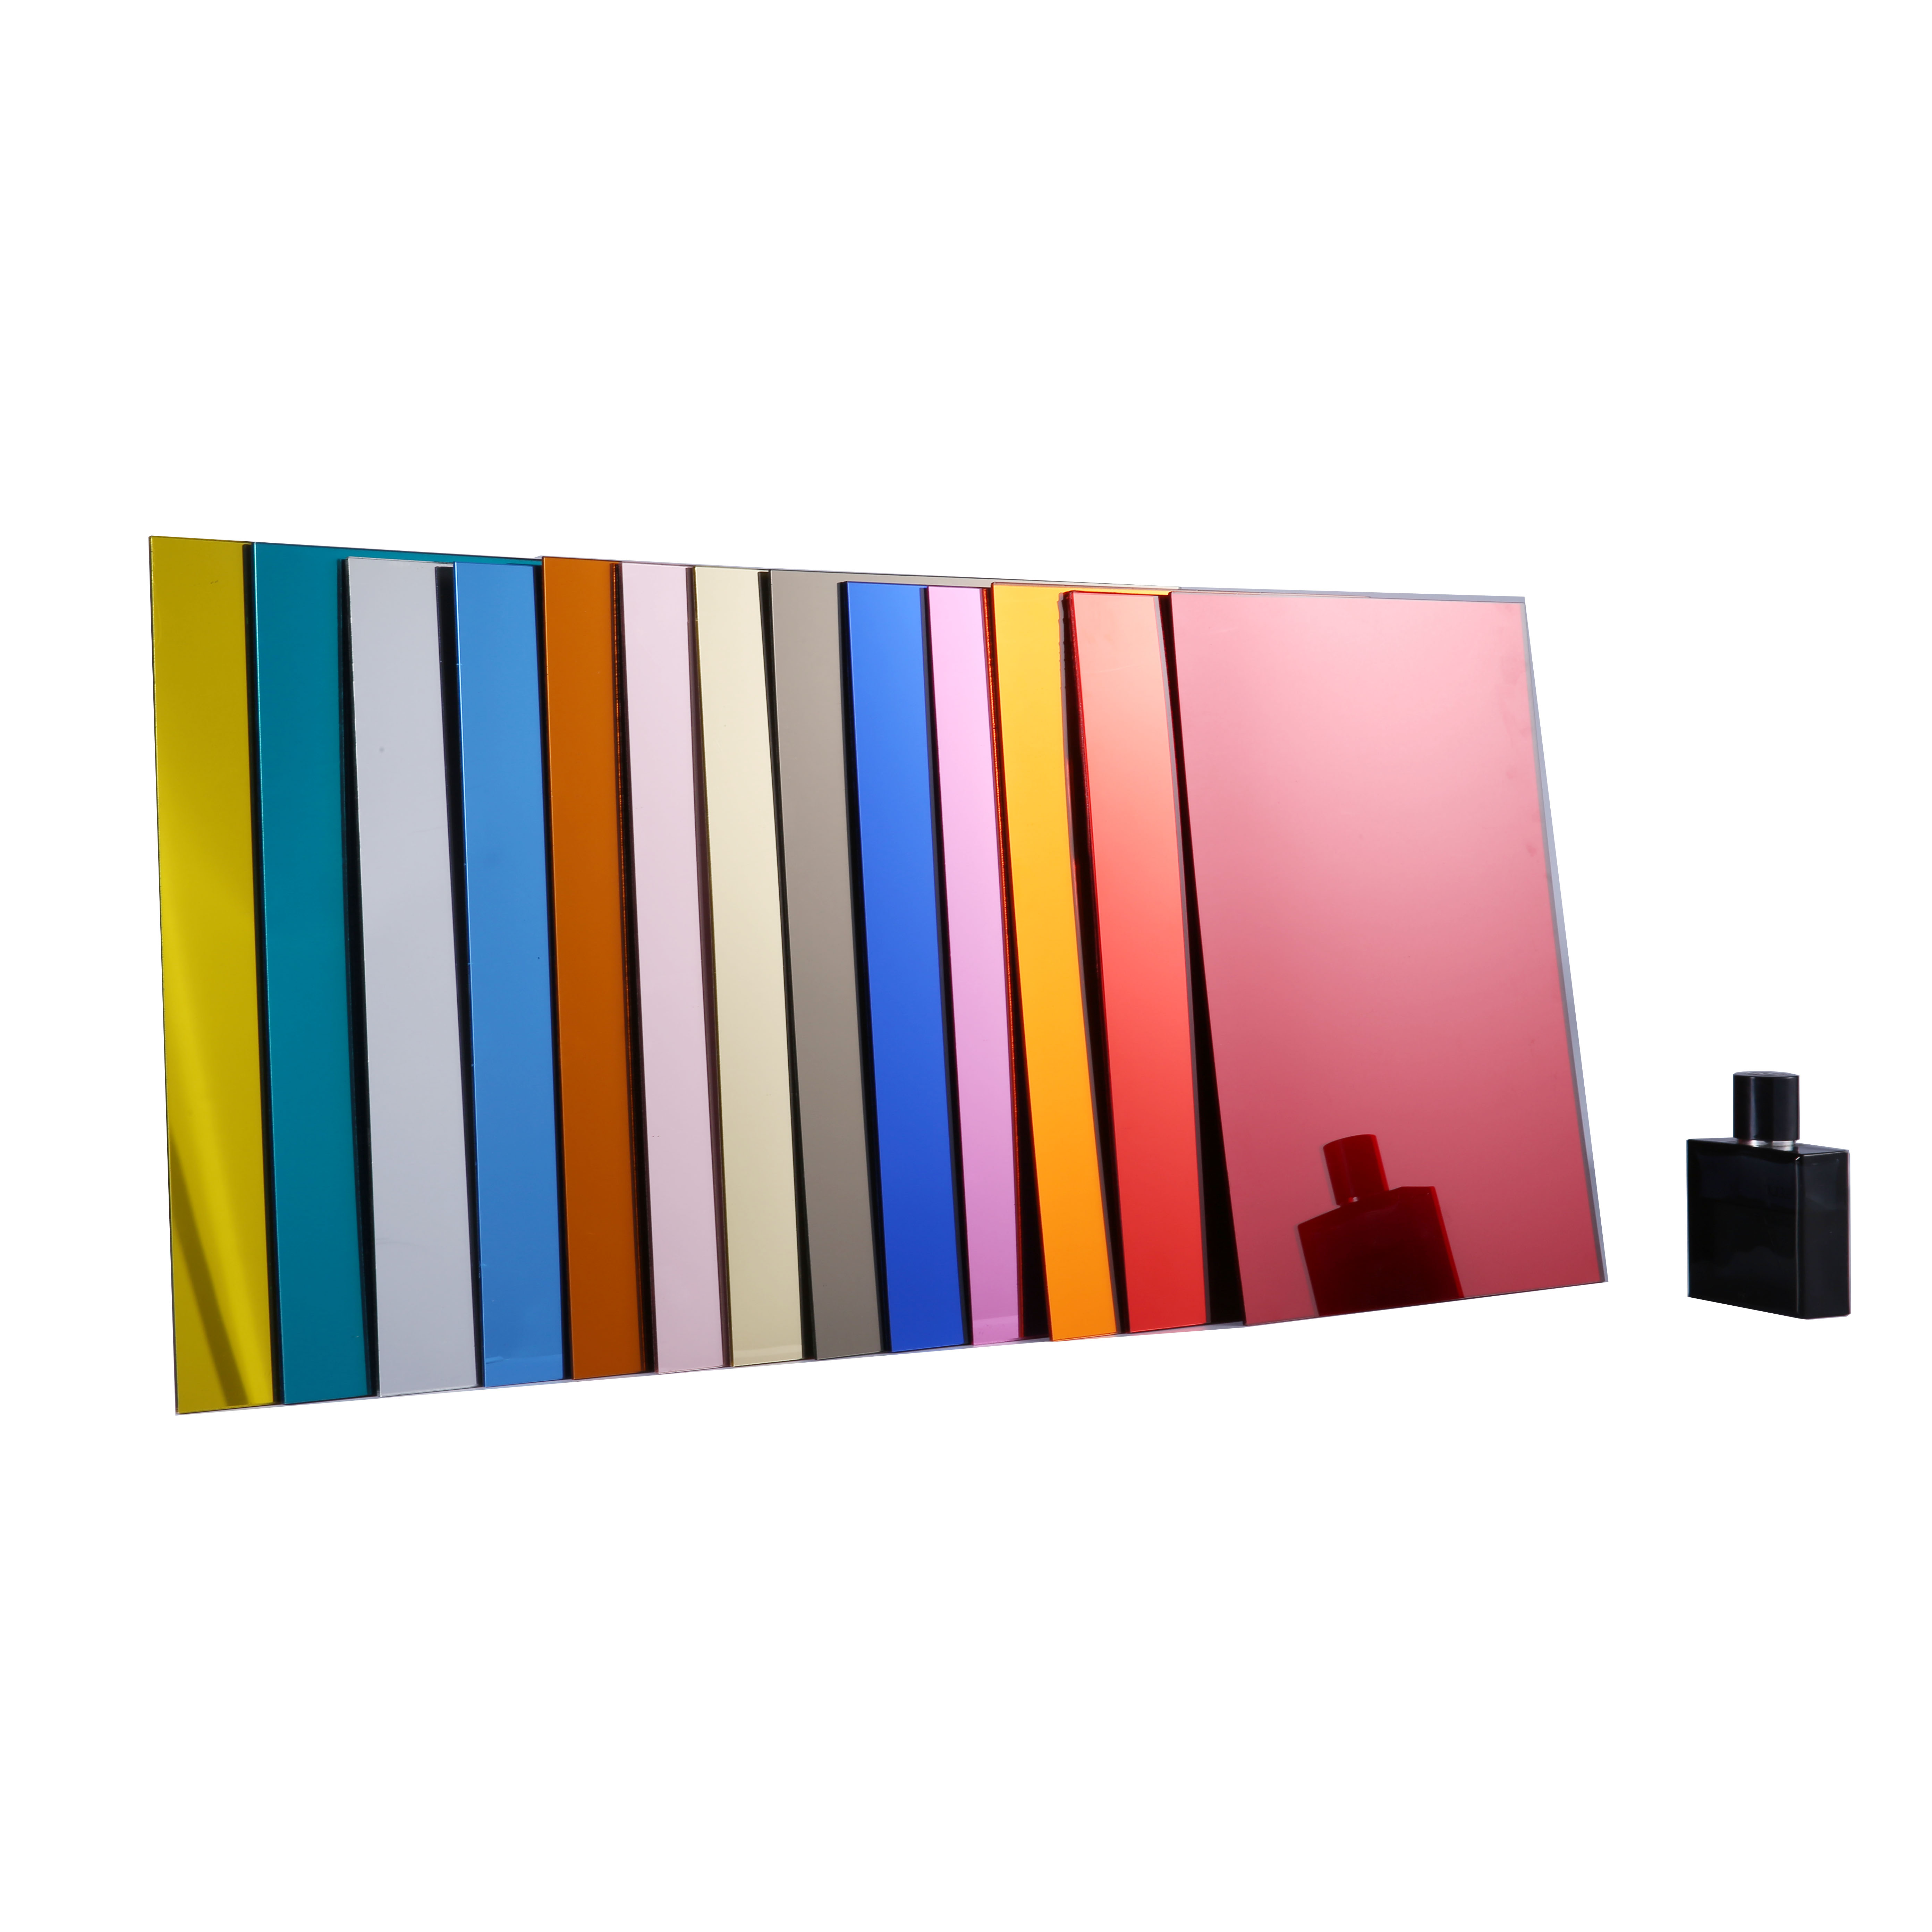 1/8" Red Acrylic Mirror Panels for Sale